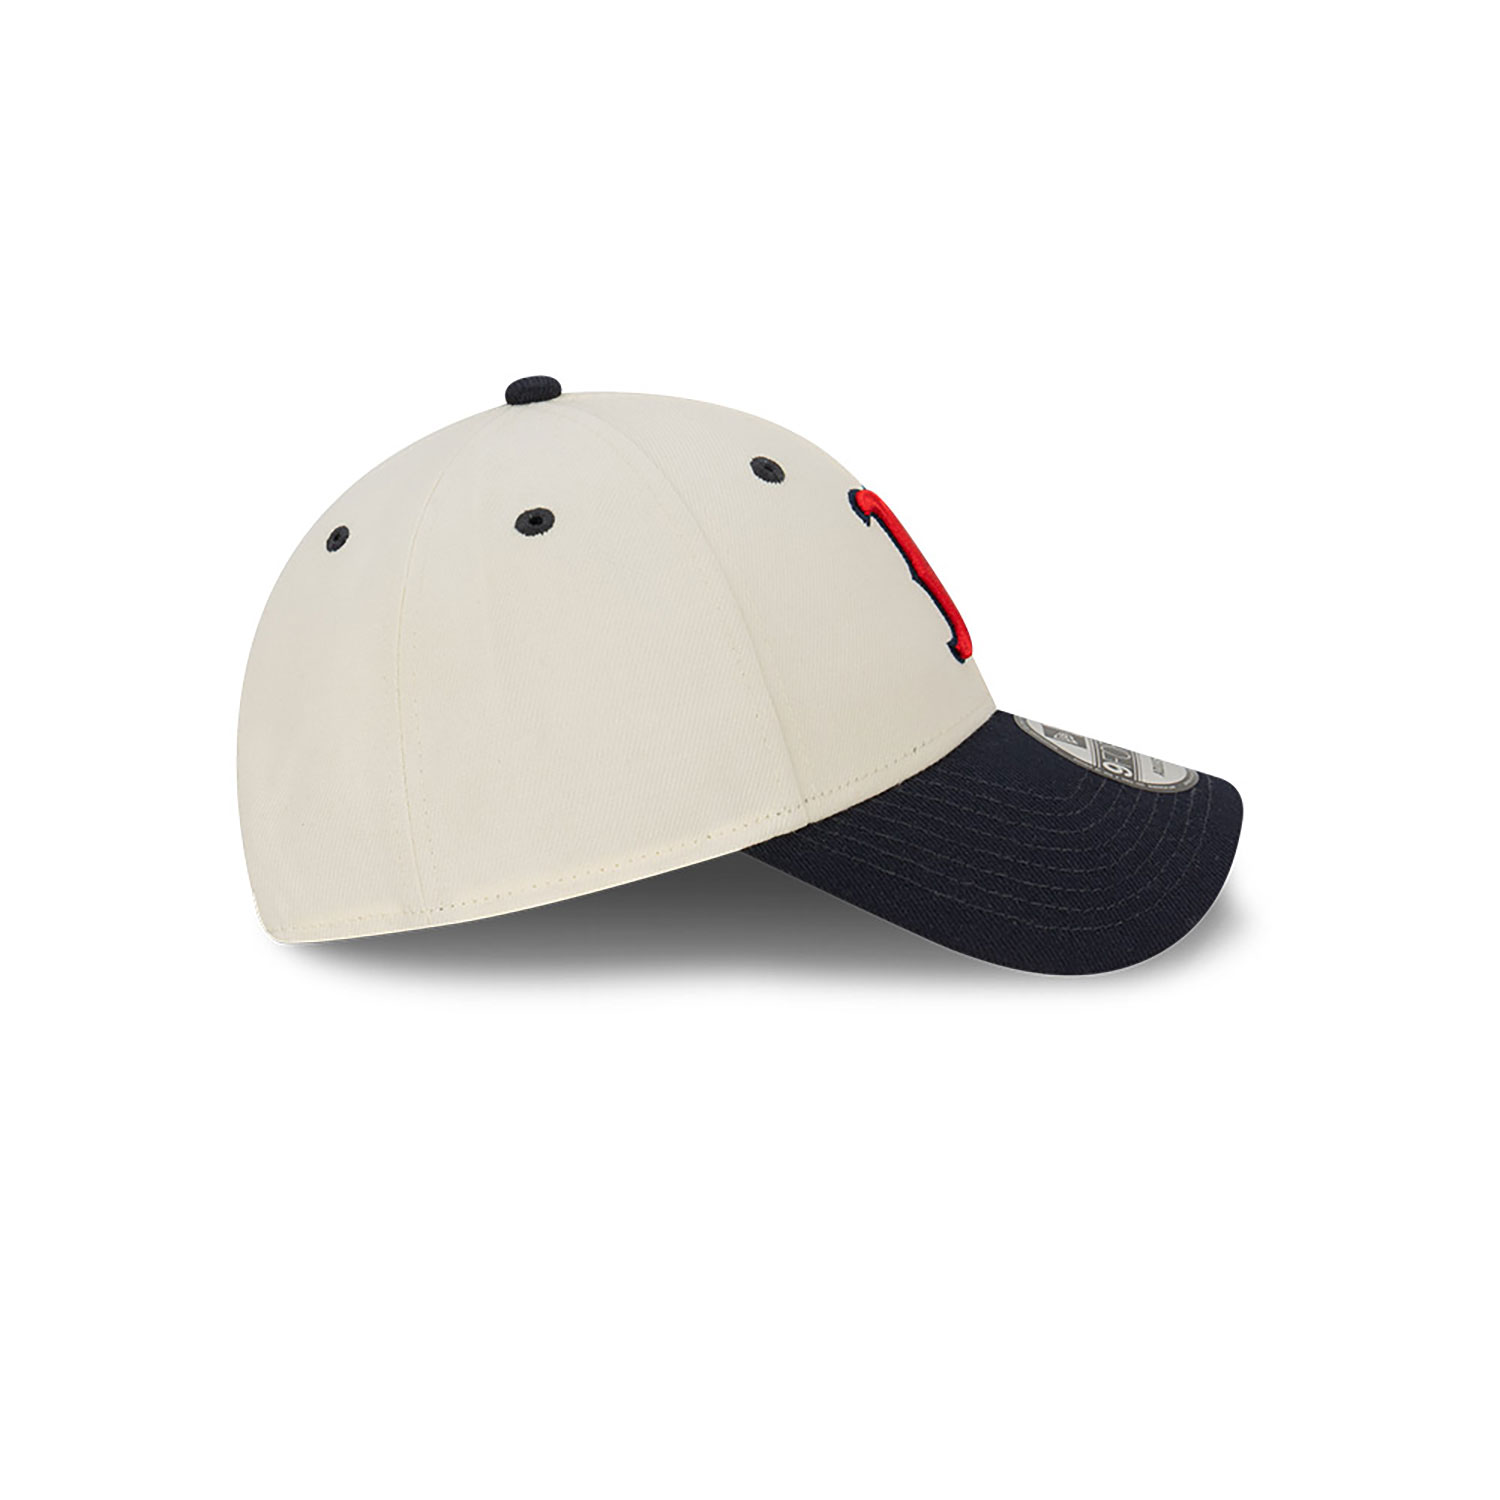 Boston Red Sox Chrome White 9FORTY Adjustable Cap